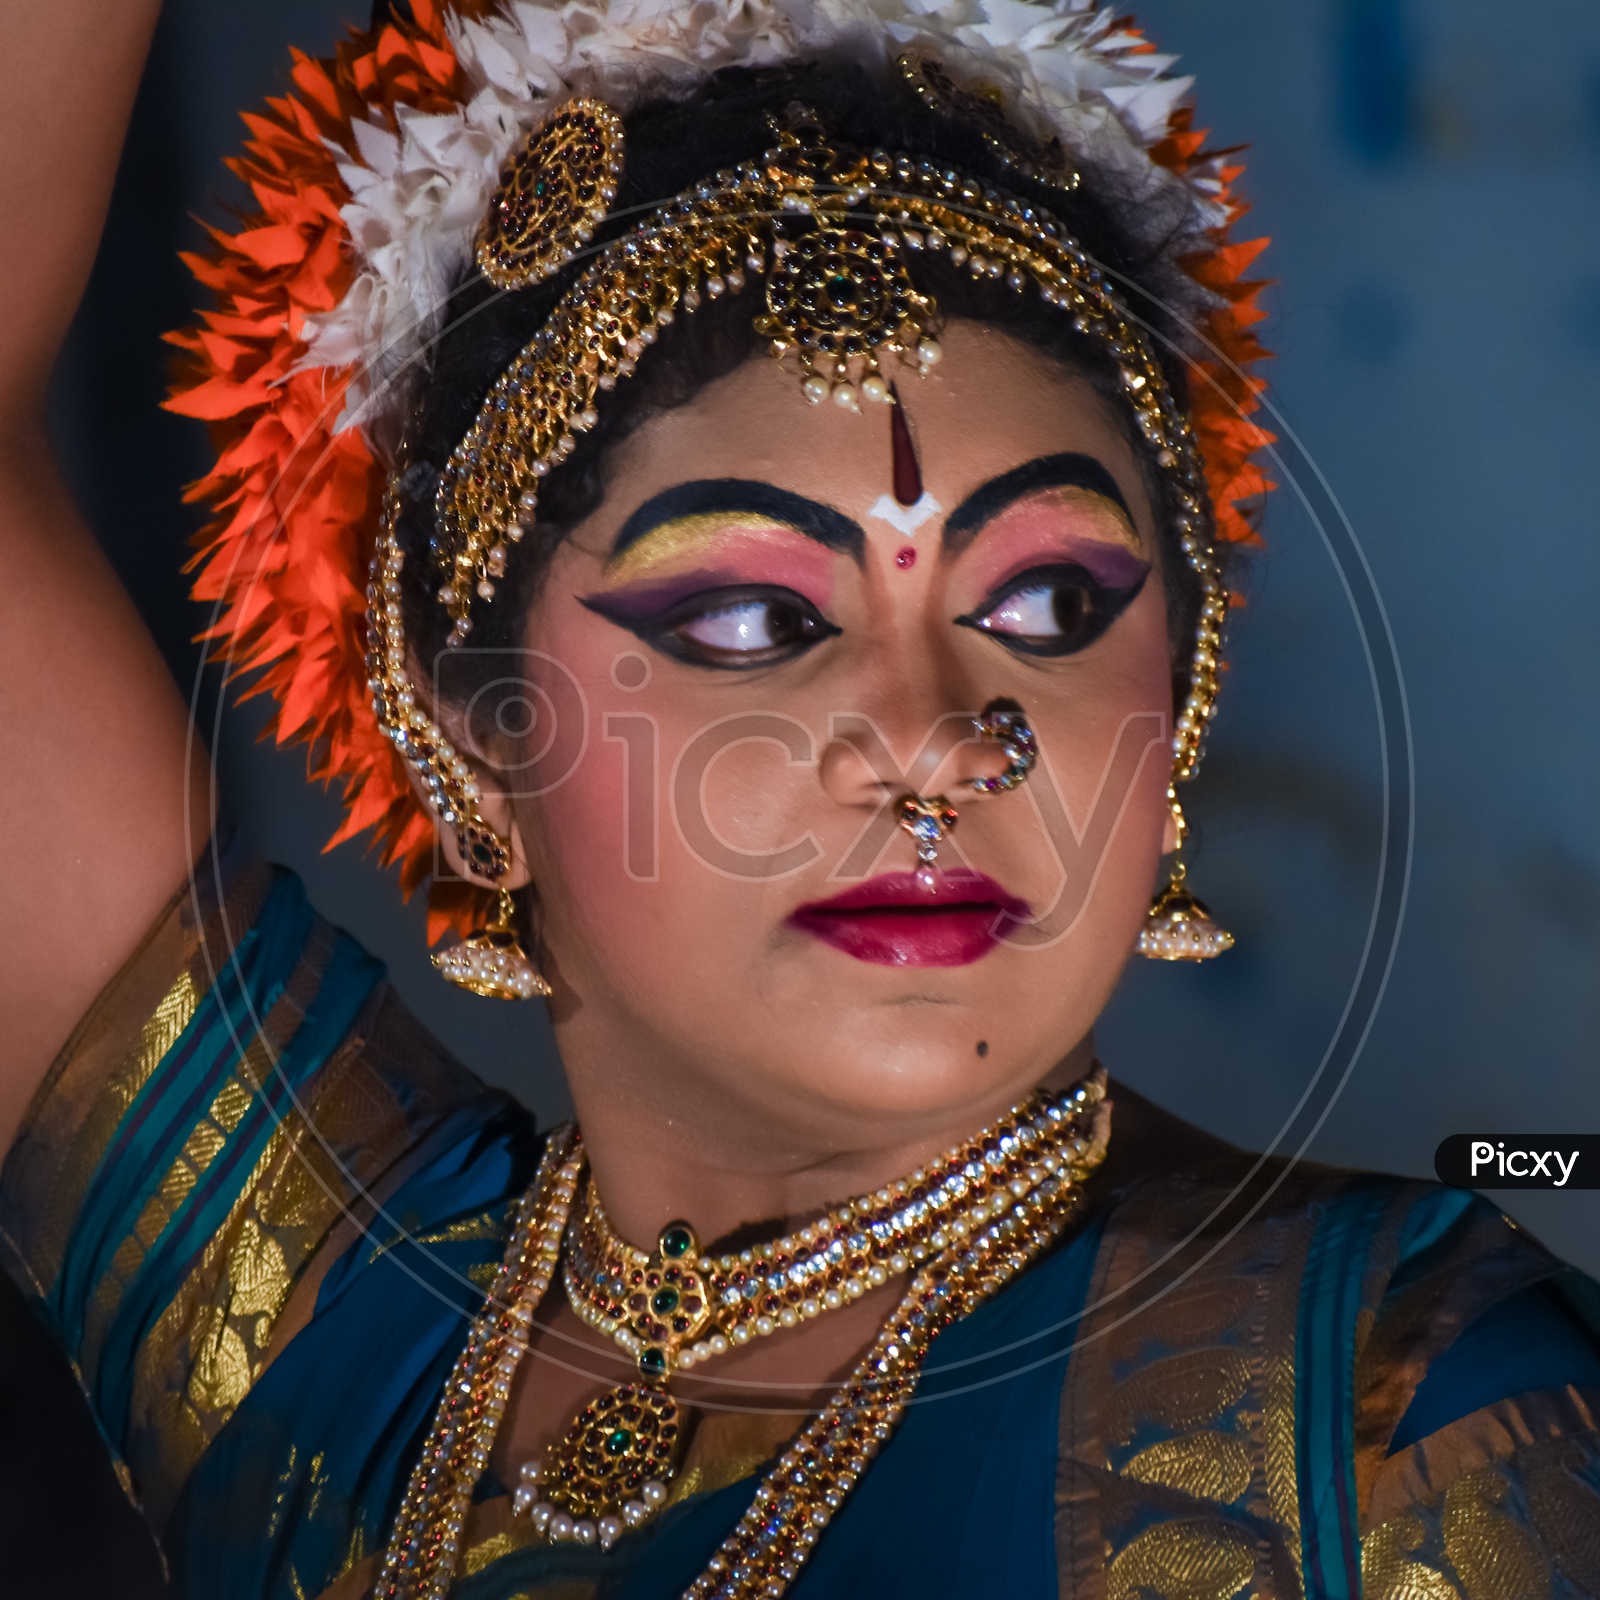 Image Of Classical Dance Ib851445 Picxy